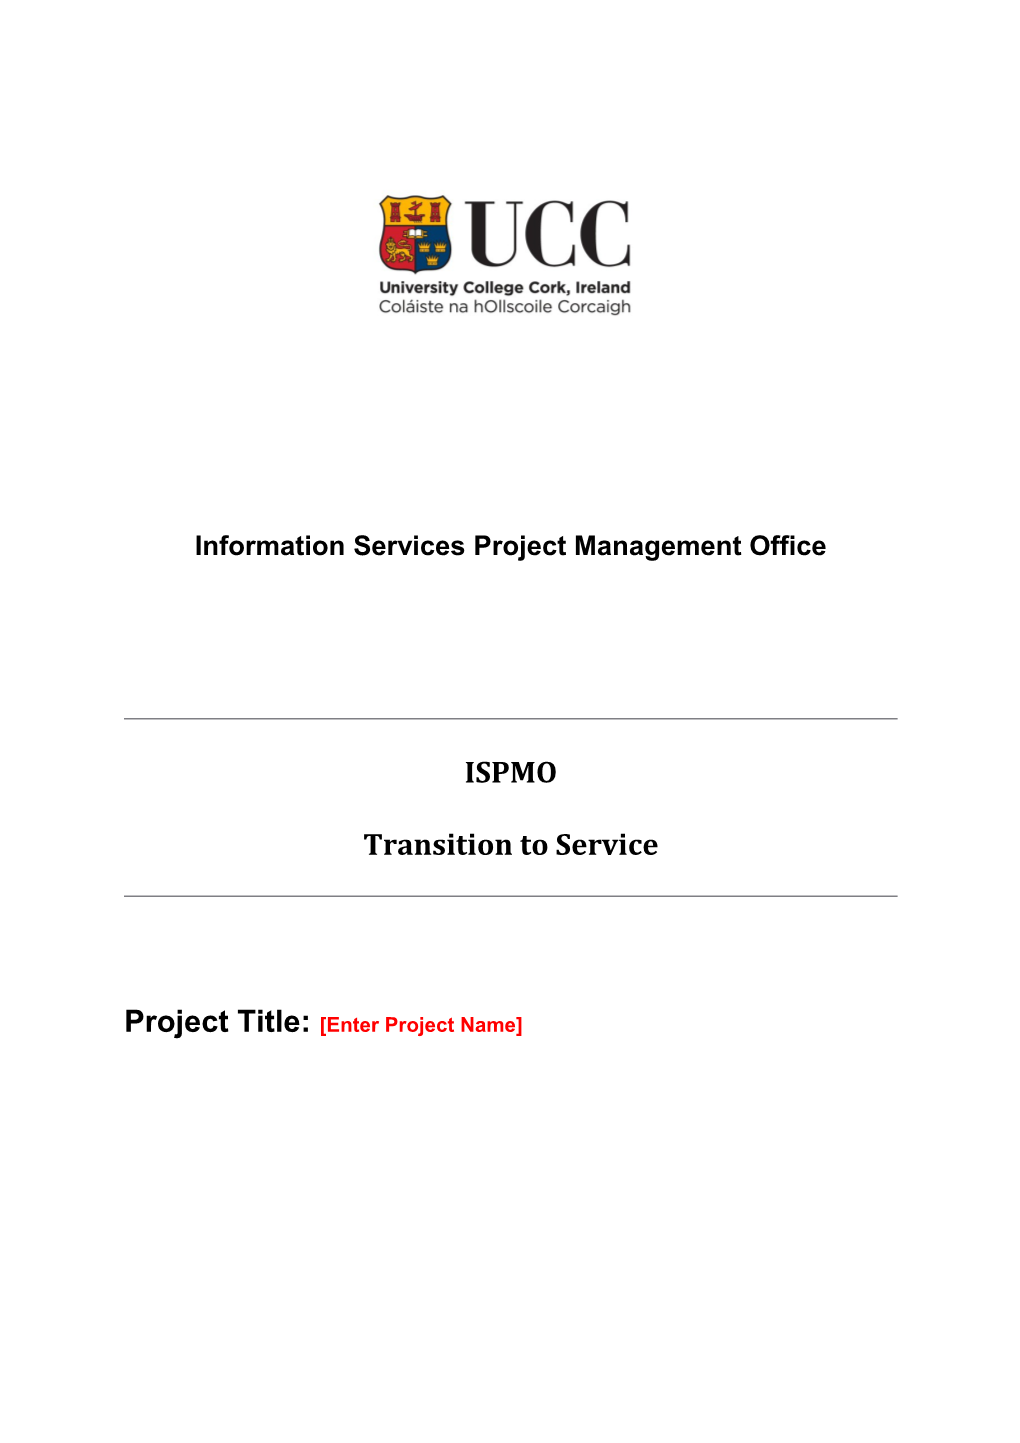 Information Services Project Management Office (ISPMO) Transition to Service